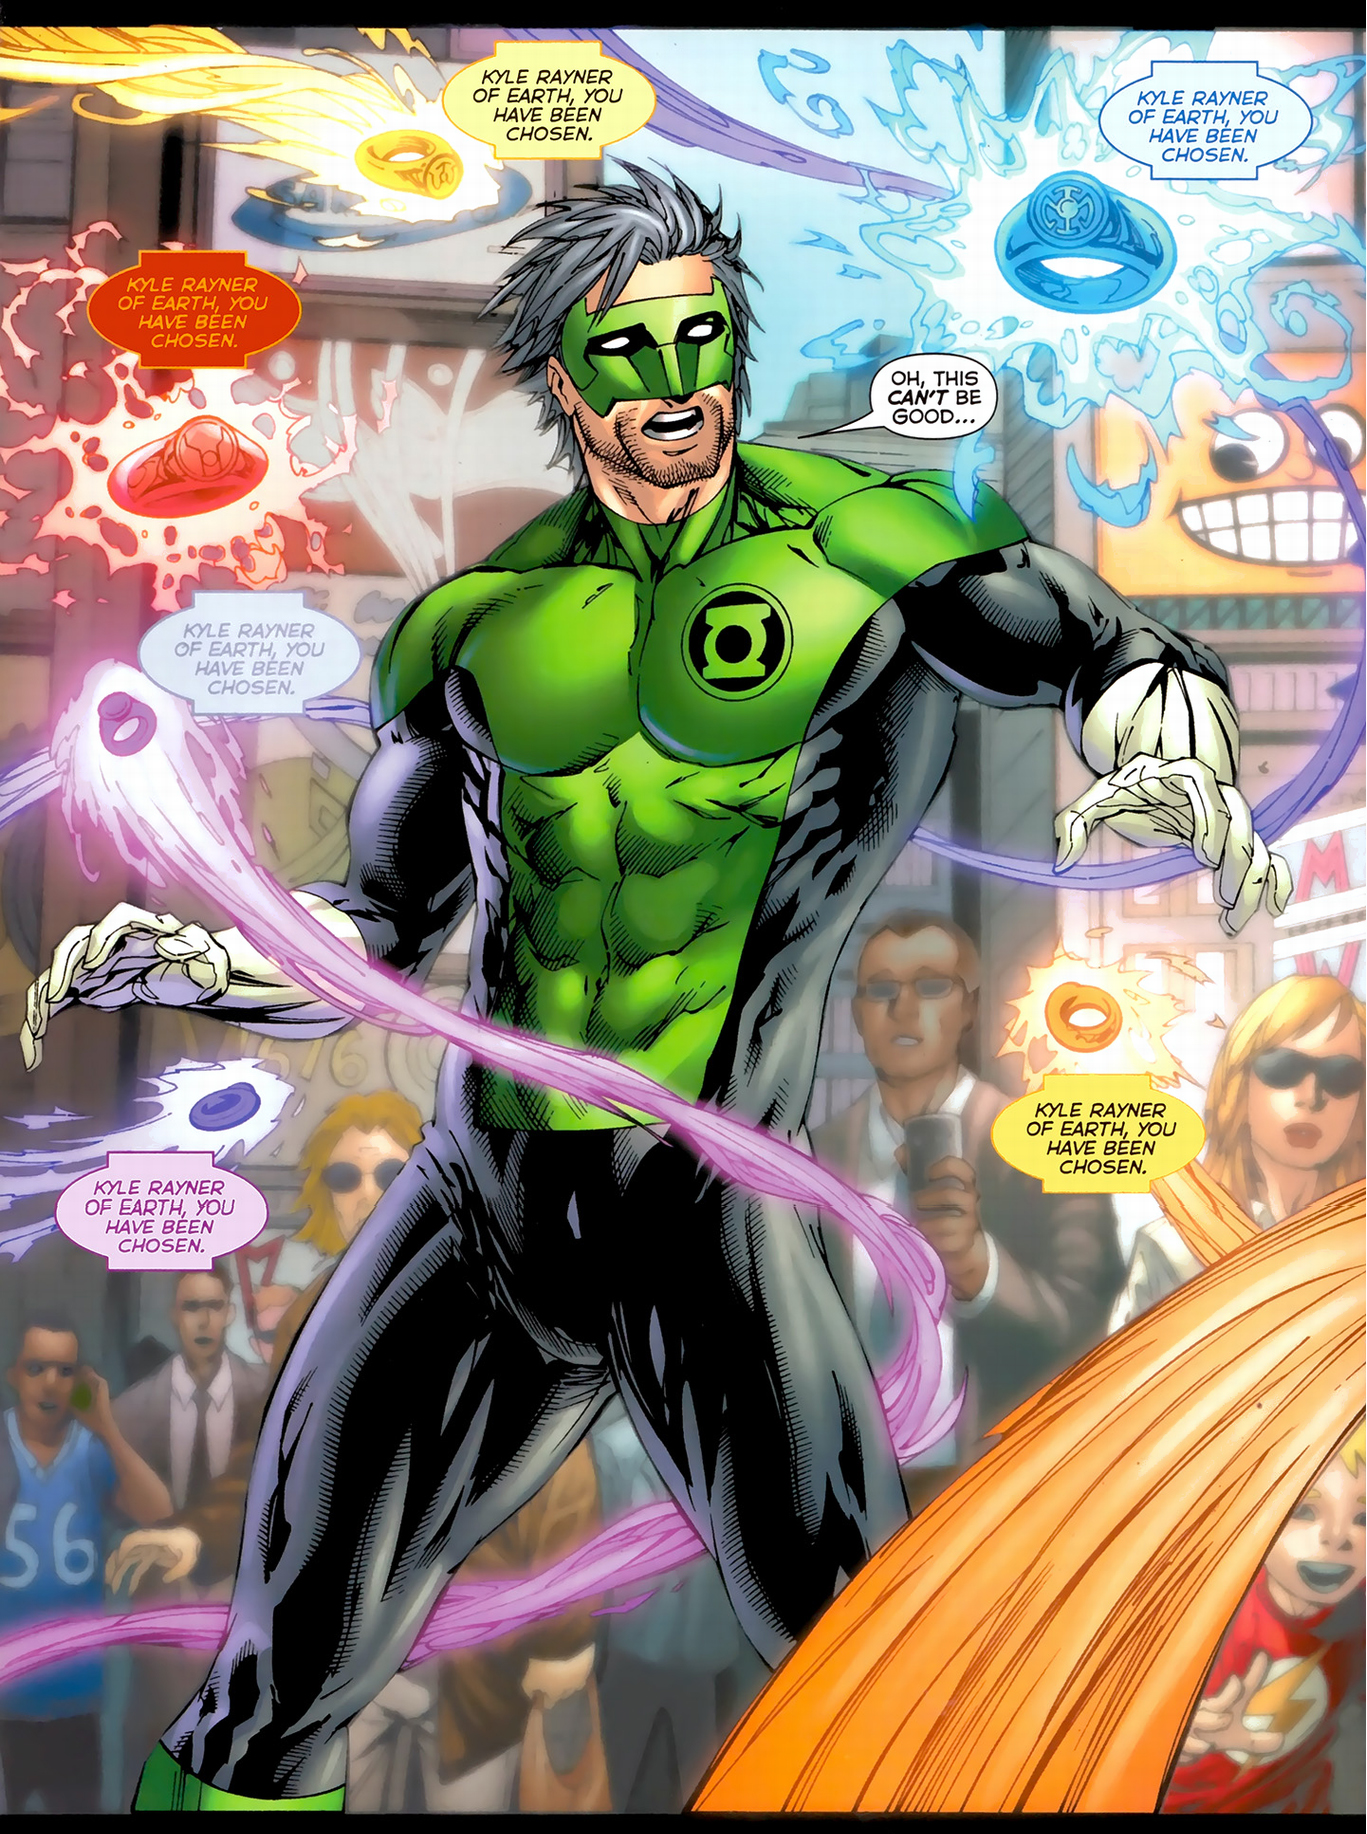 kyle rayner is chosen by all 7 rings